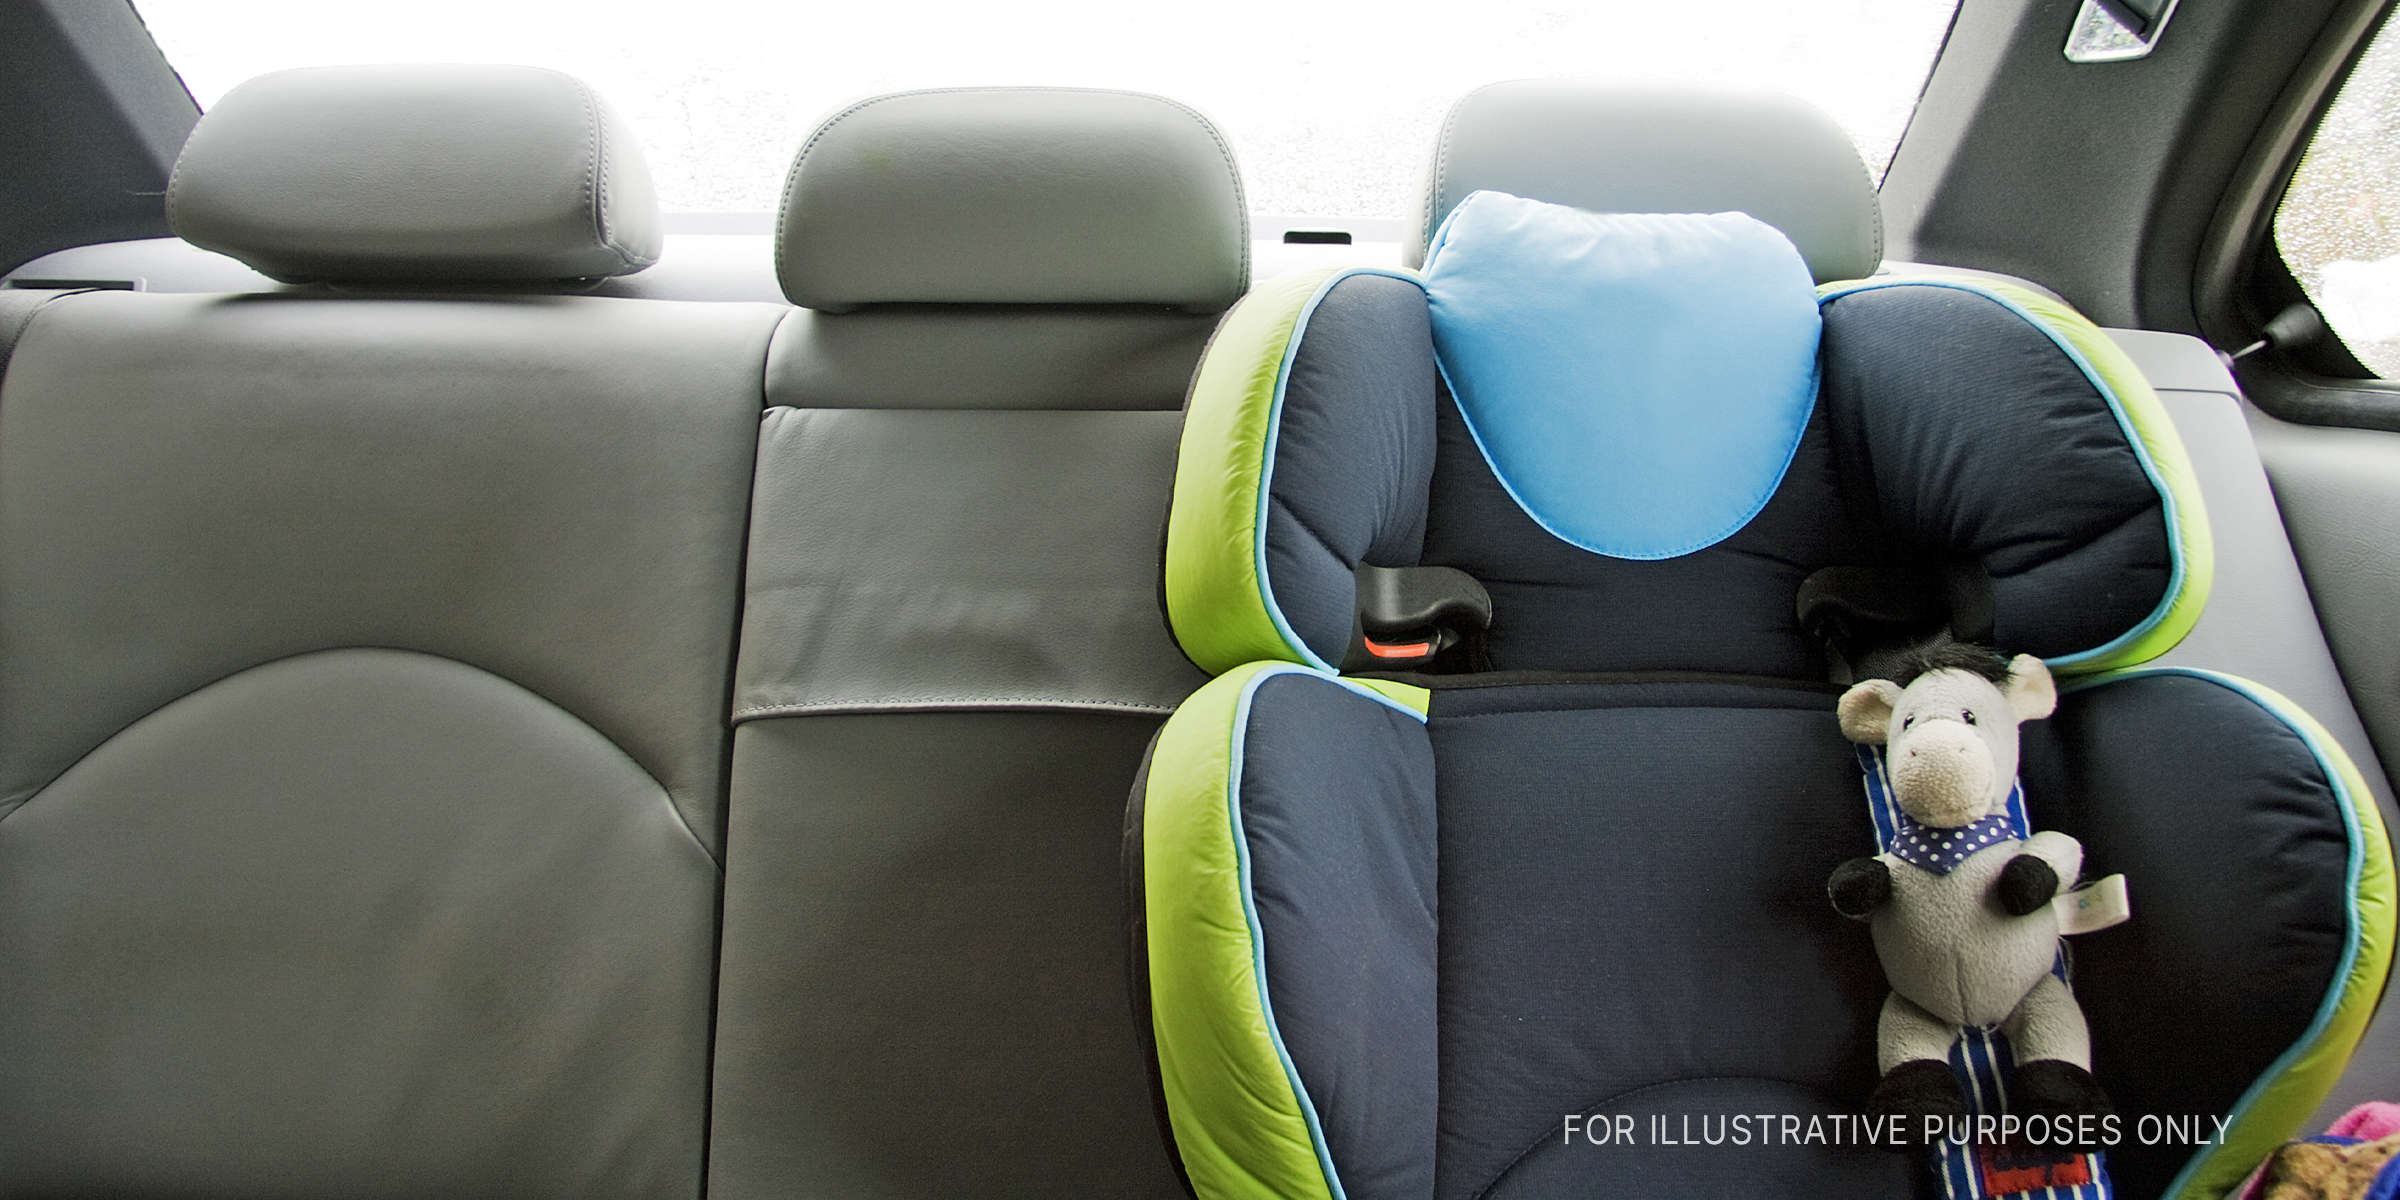 Empty child's car seat in back of car | Source: Shutterstock